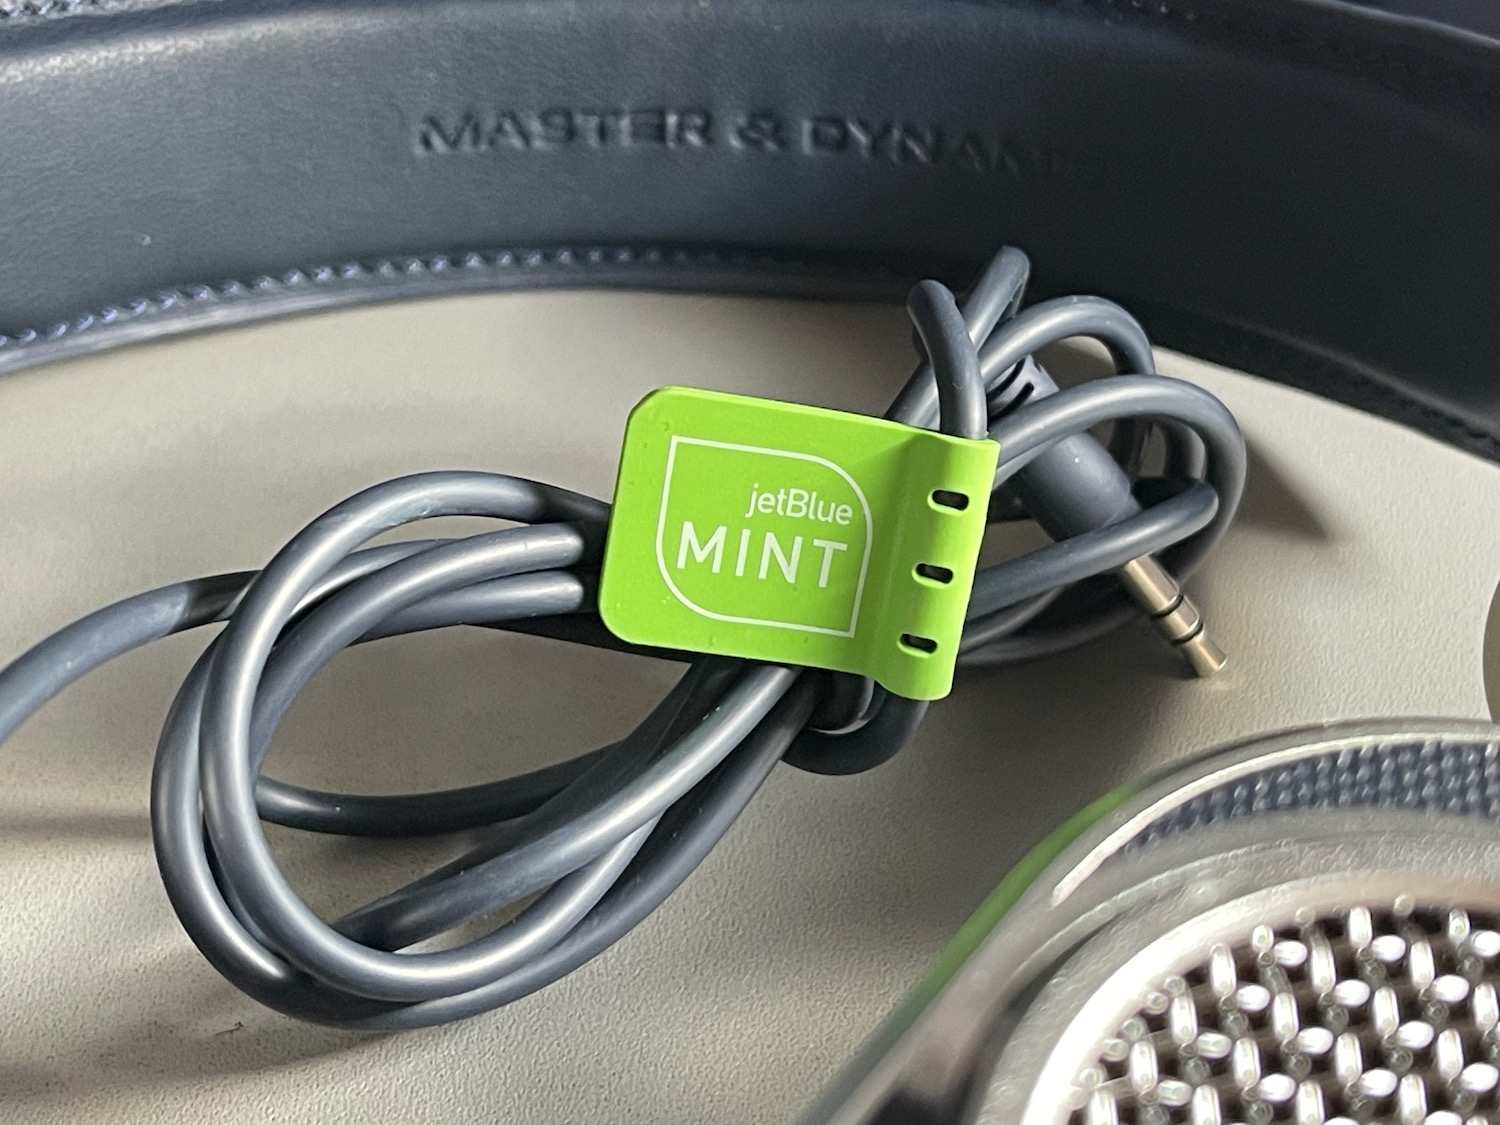 a headphones with a green cable